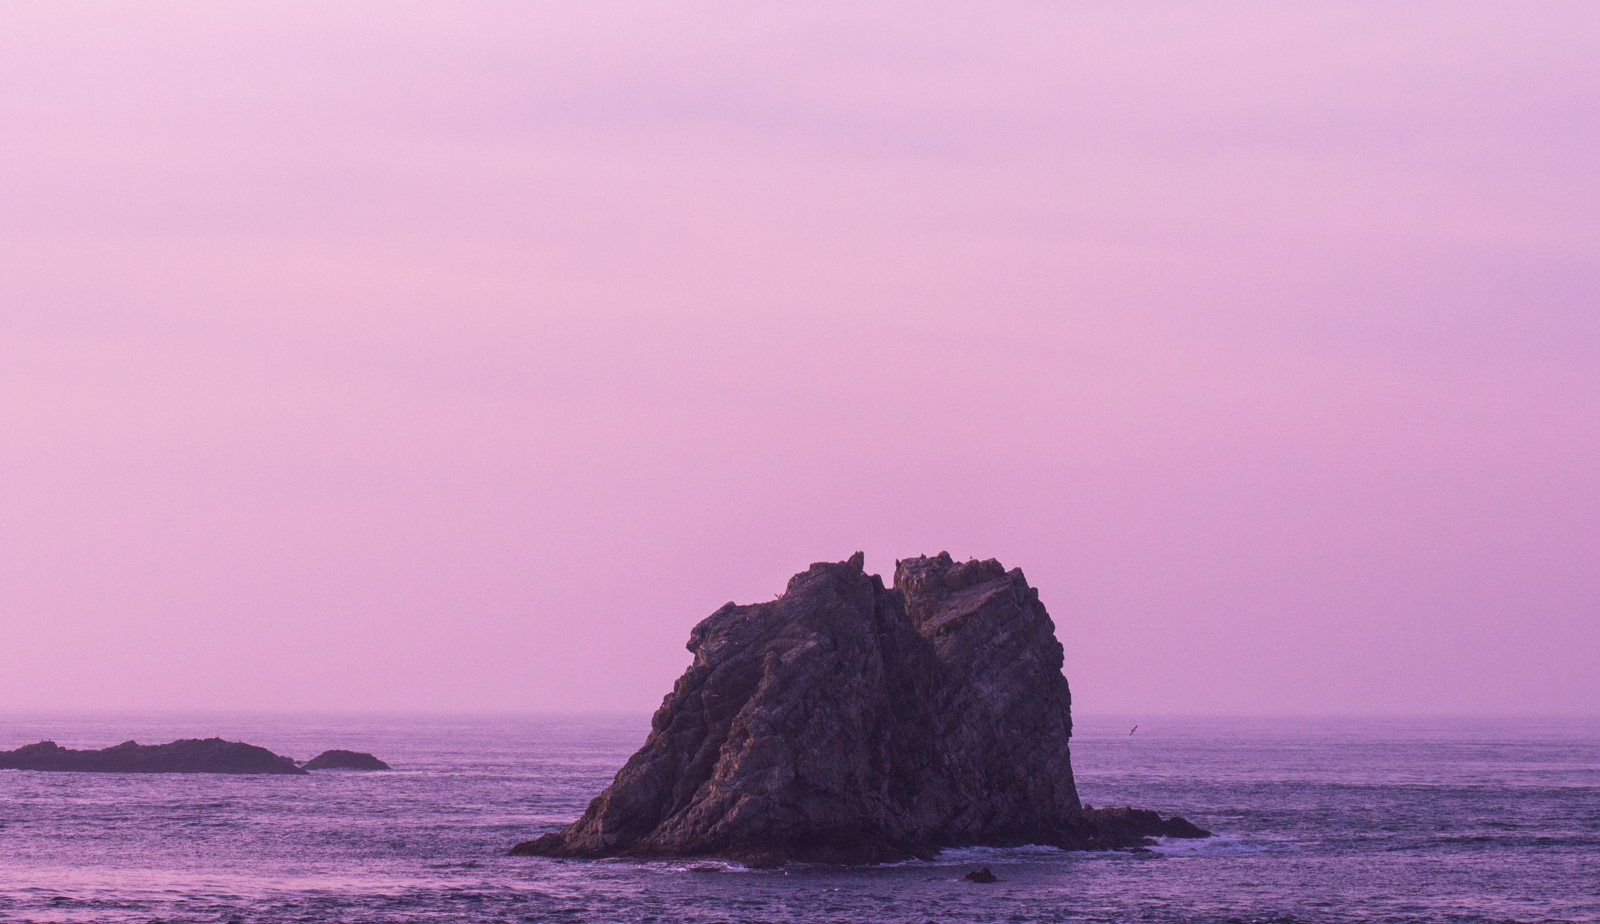 huge rock or a small island in the ocean during a sunset